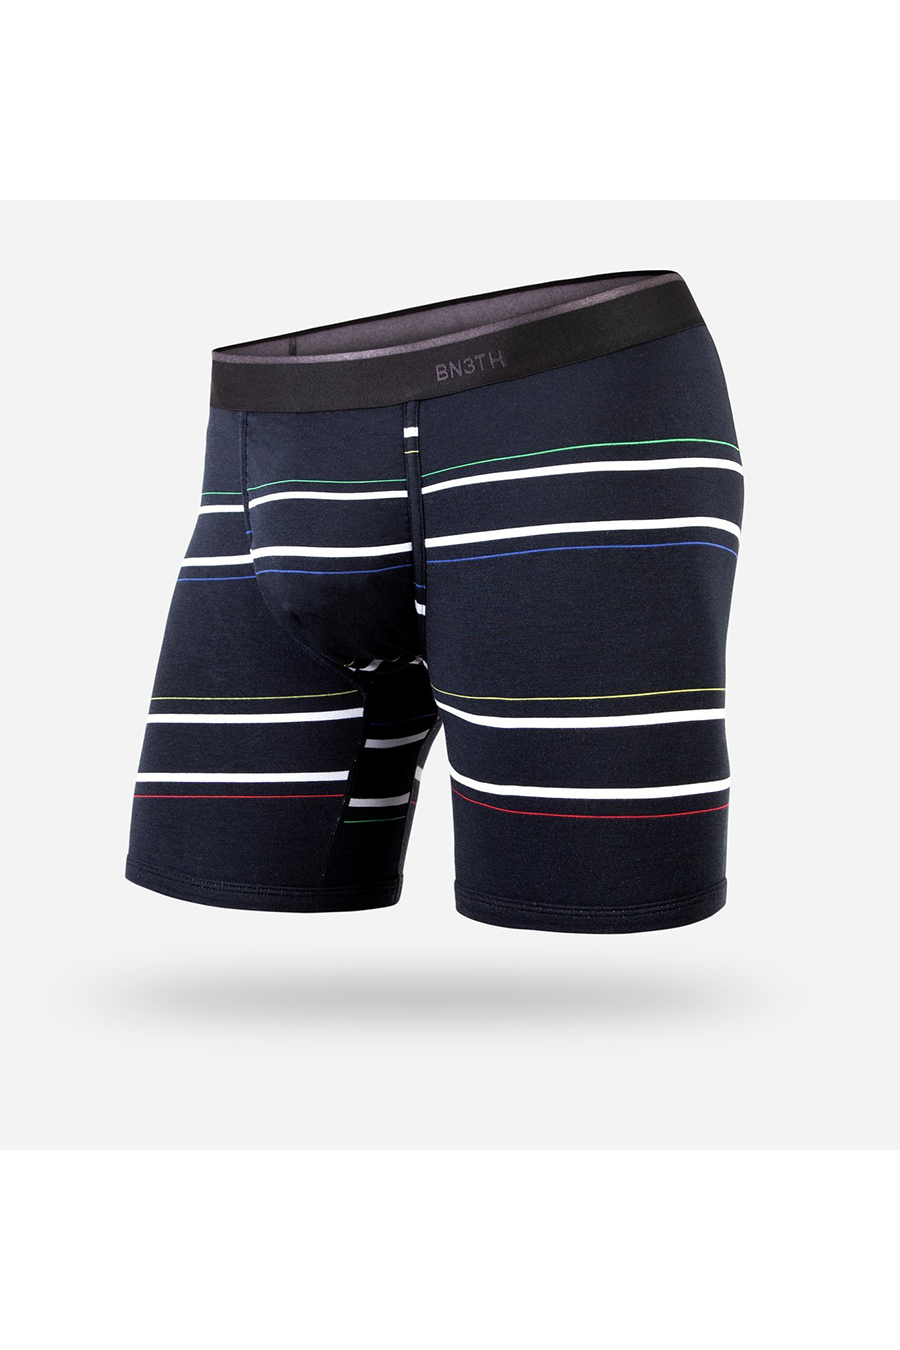 Classic Boxer Brief | Nice Stripe - West of Camden - Main Image Number 2 of 4